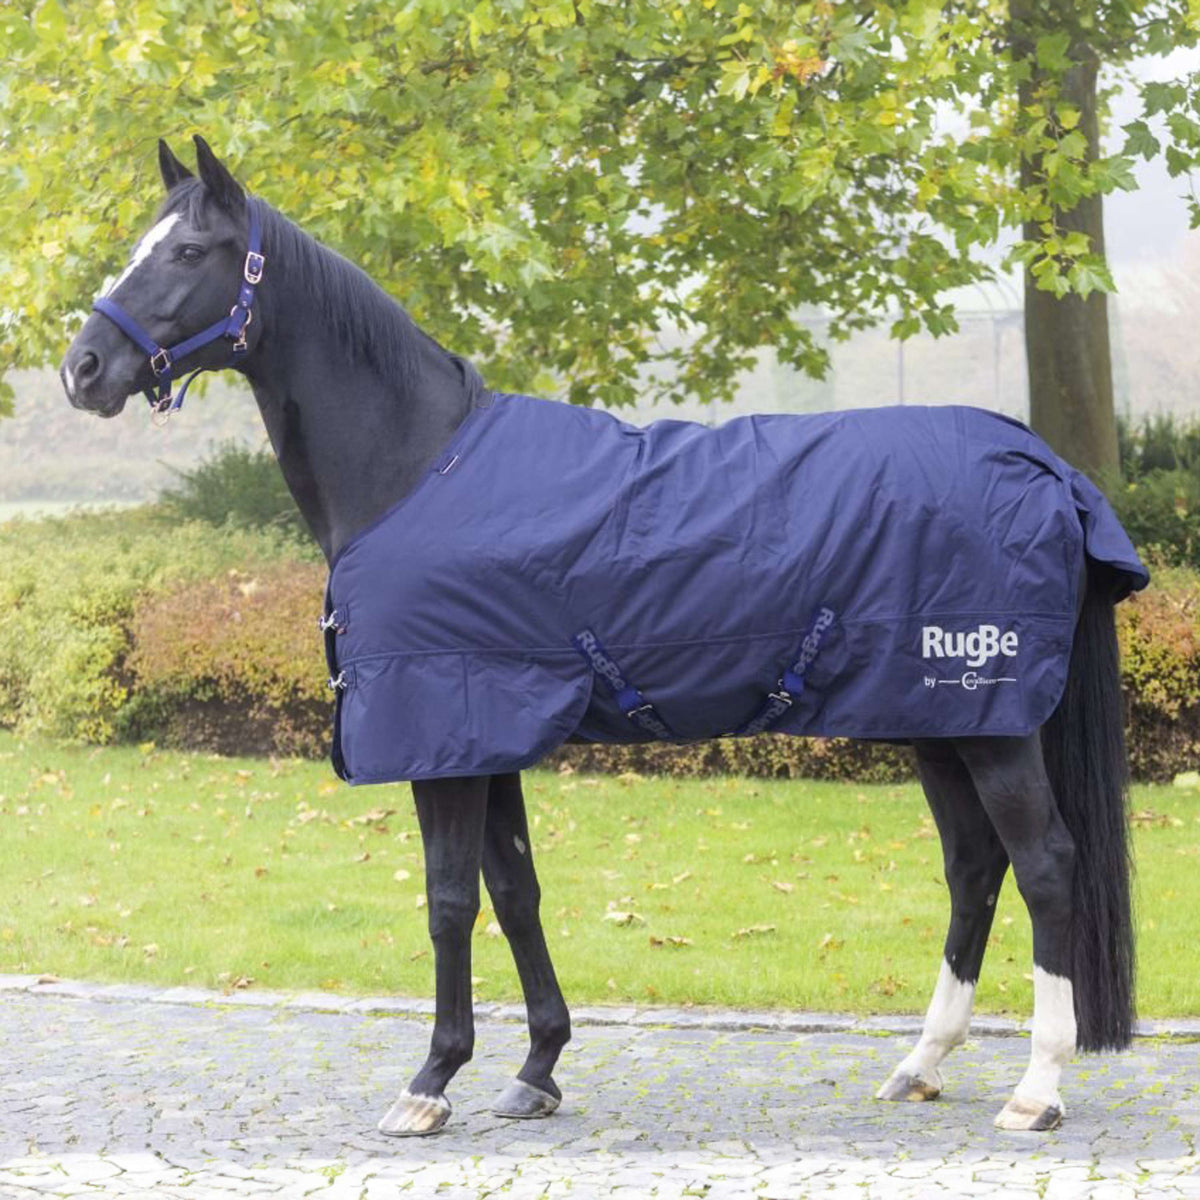 RugBe by Covalliero Winterdecke IceProtect 300g Dark Navy